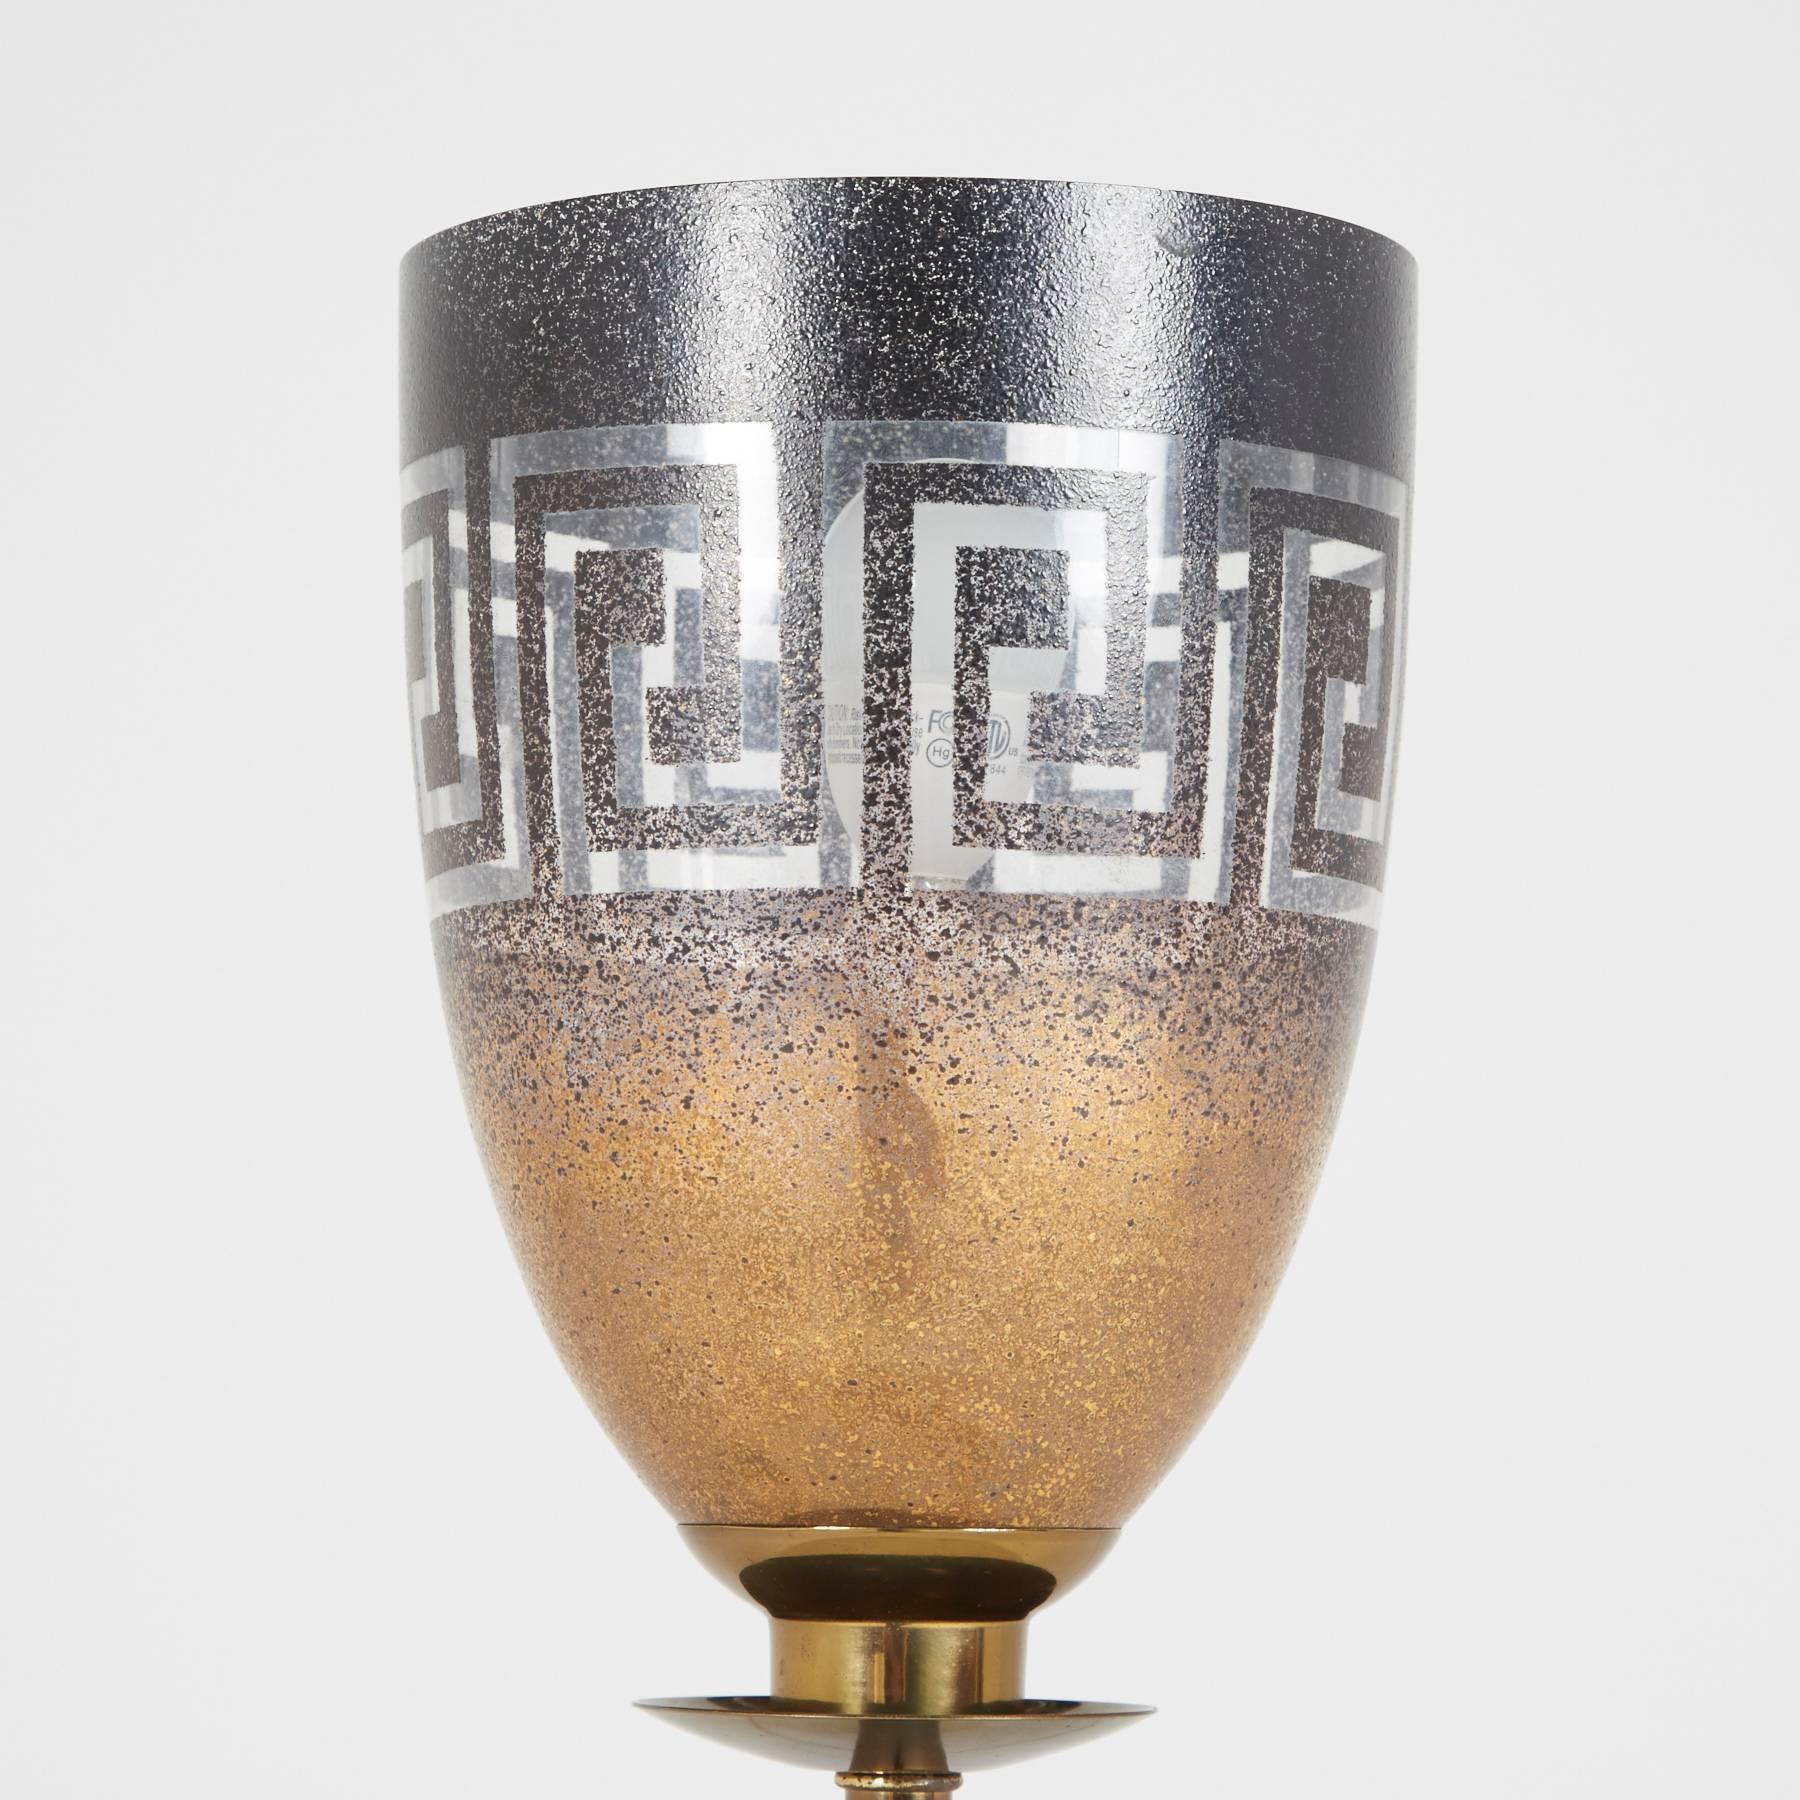 Founded in Chicago in 1932, Stiffel has remained an industry leader and innovator for over seven decades. A tapering glass shade is decorated with a black and gold Greek key design. The lamp's brass sconce is placed atop a slender stem and square